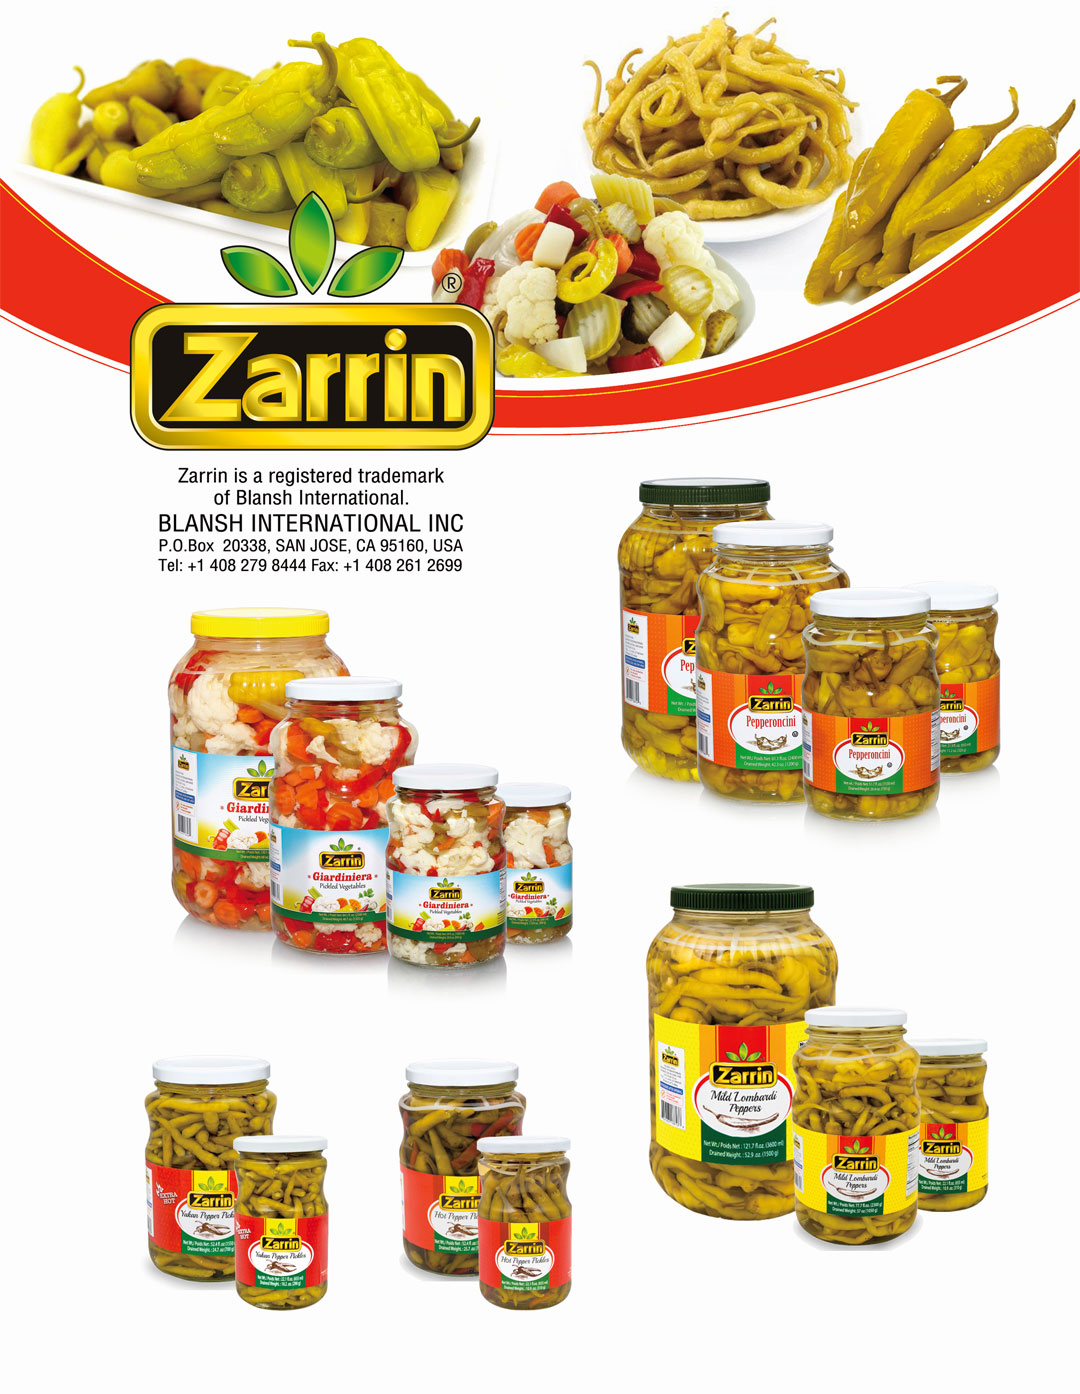 Wholesale grocer by Zarrin featuring Persian Giardiniera pickled in glass jar.